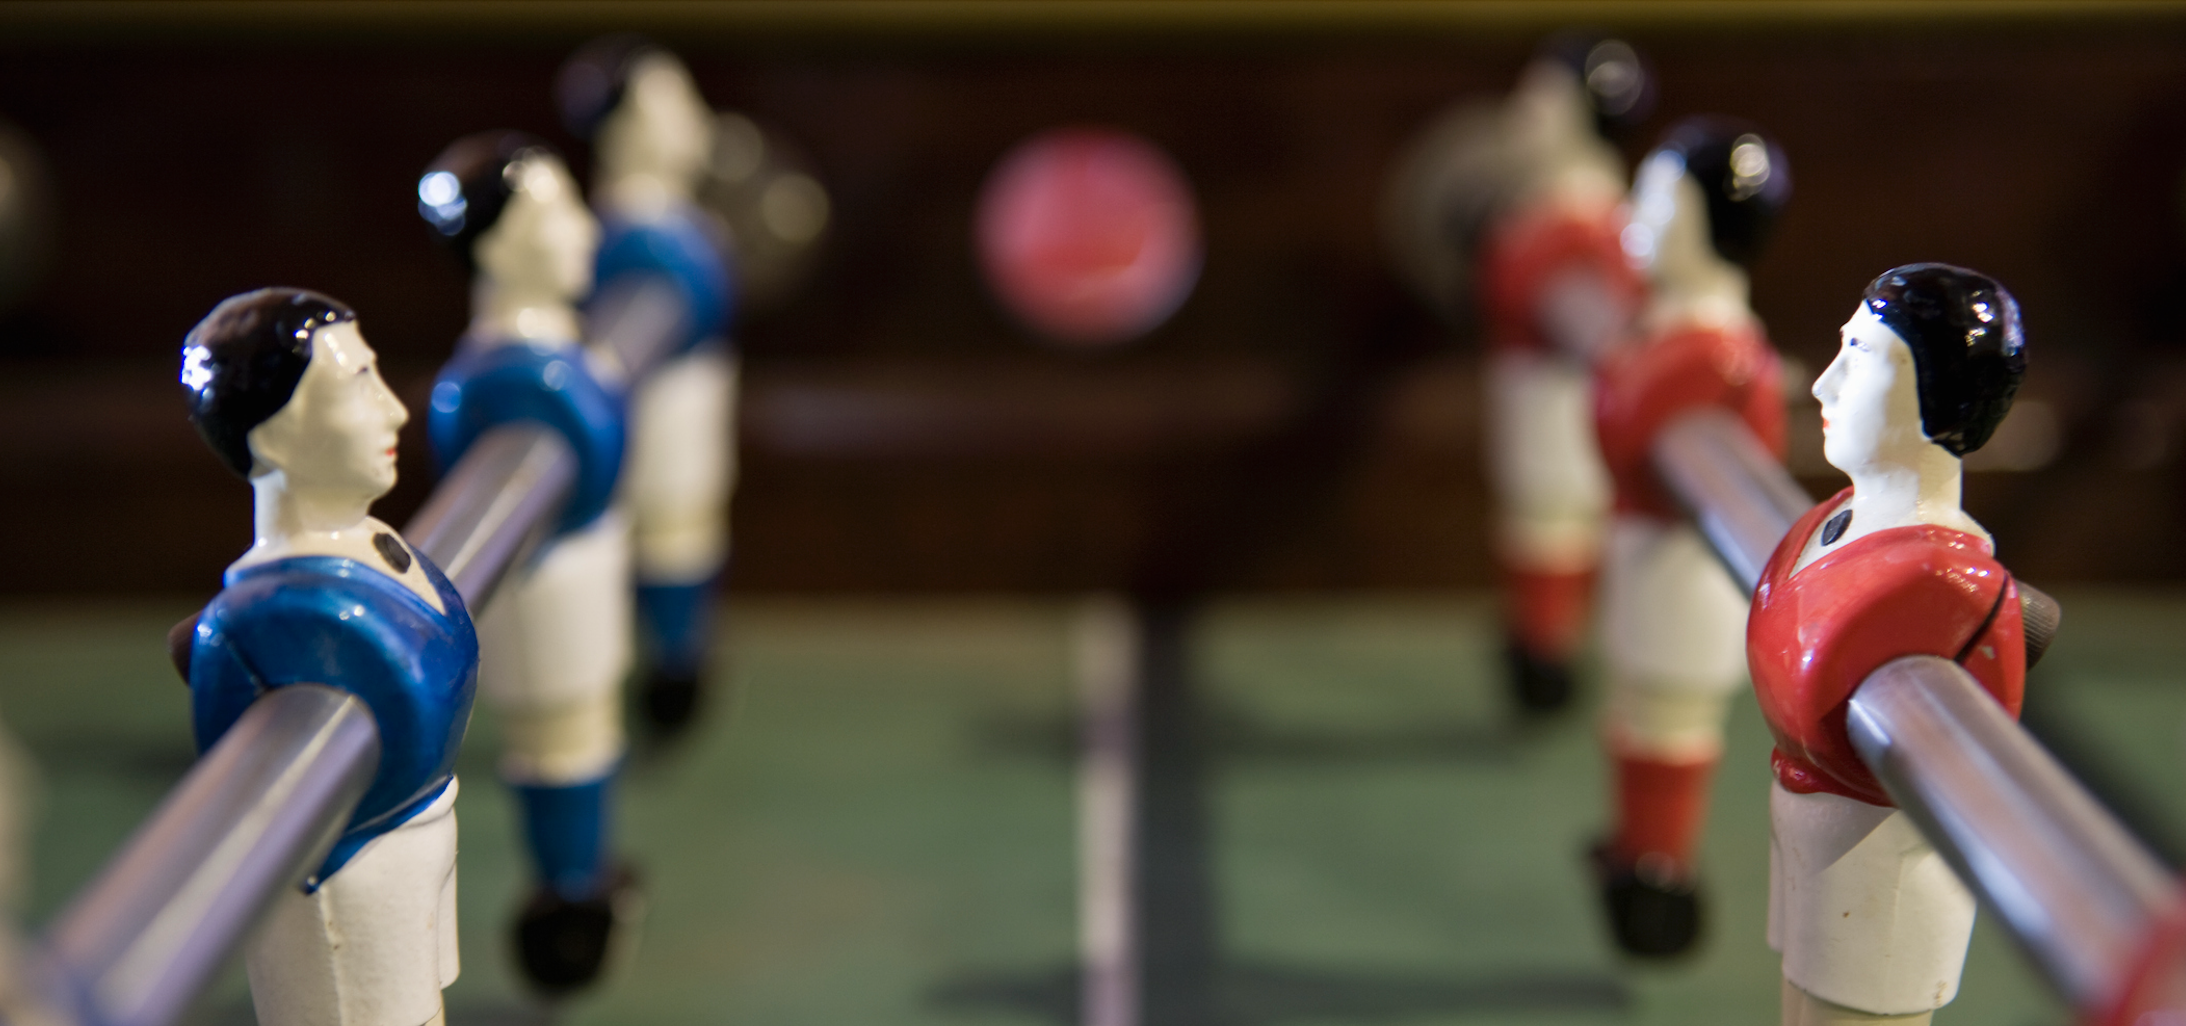 Closeup image of a foosball table, with plastic figures on metal rods facing off in blue and red jerseys.